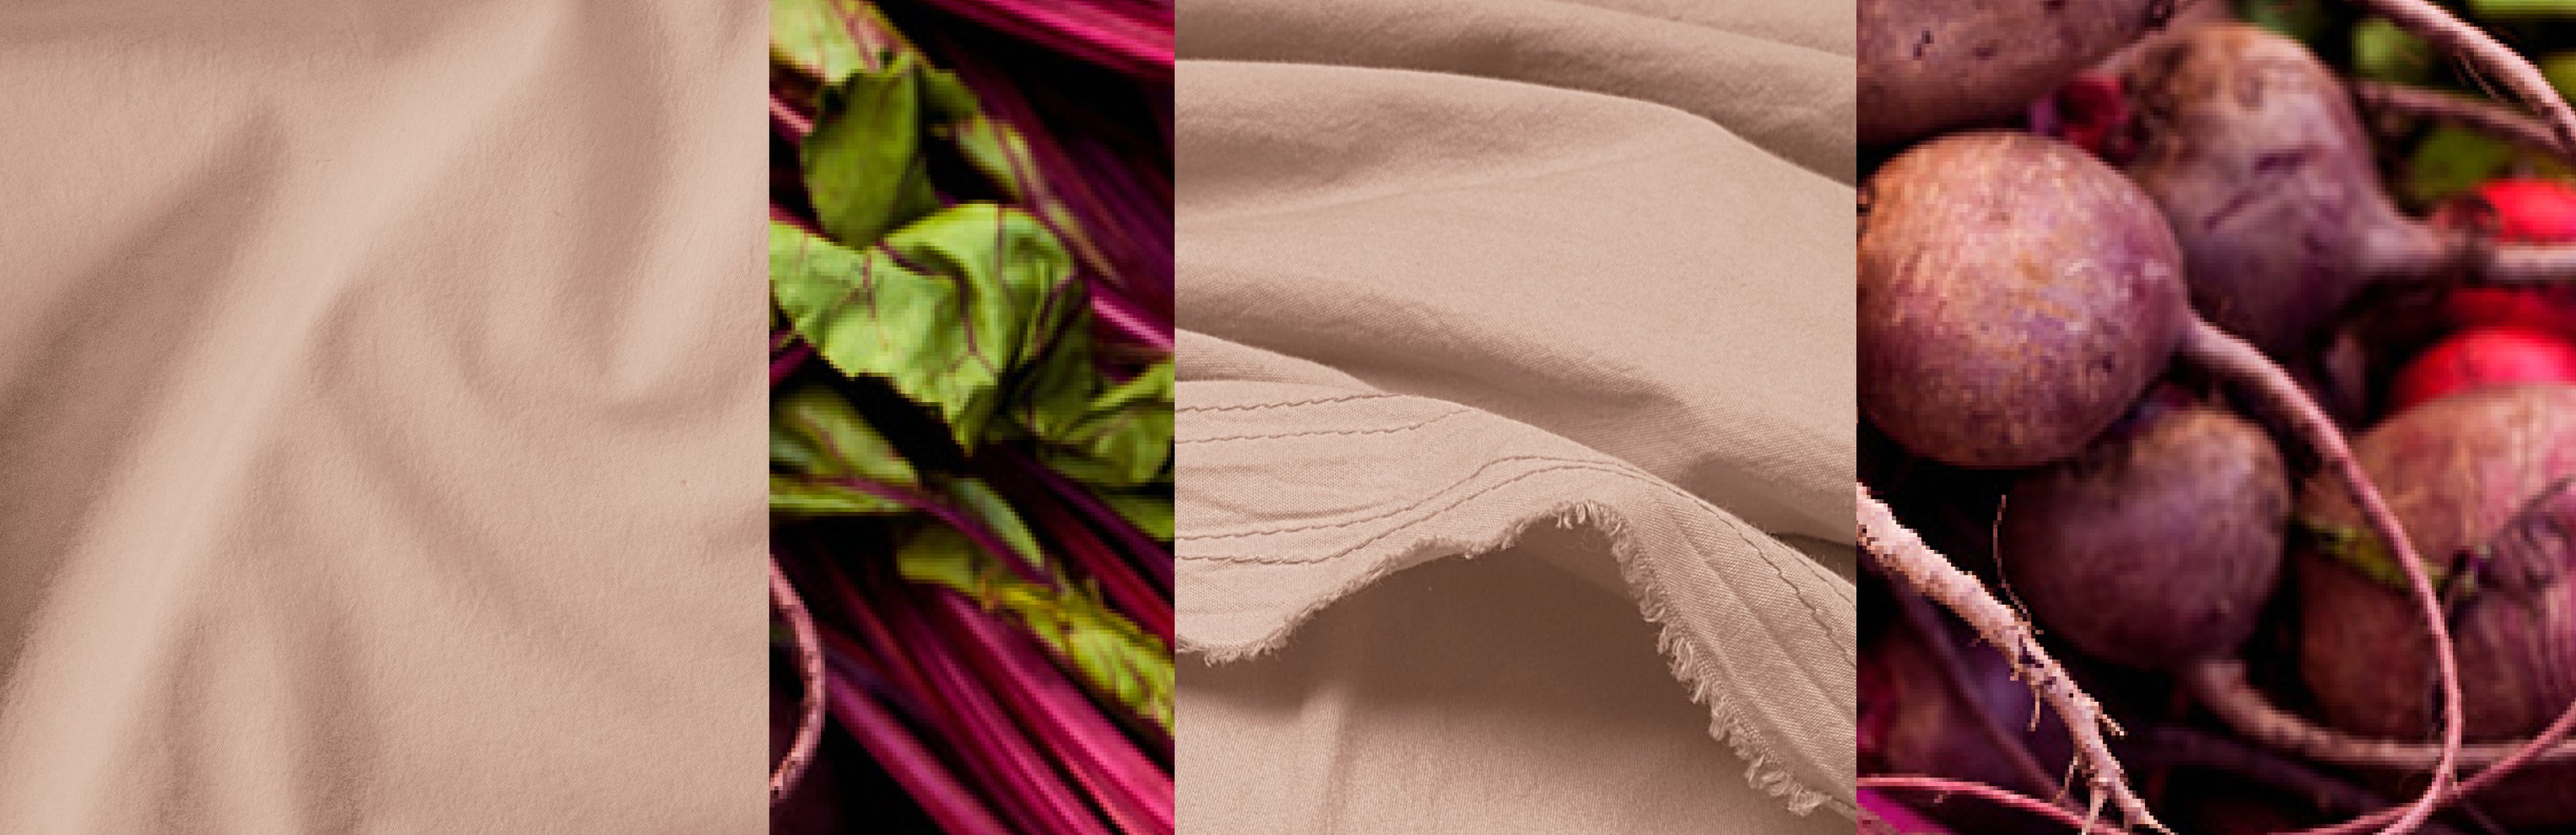 Images of beets and Pink Sandstone fabric